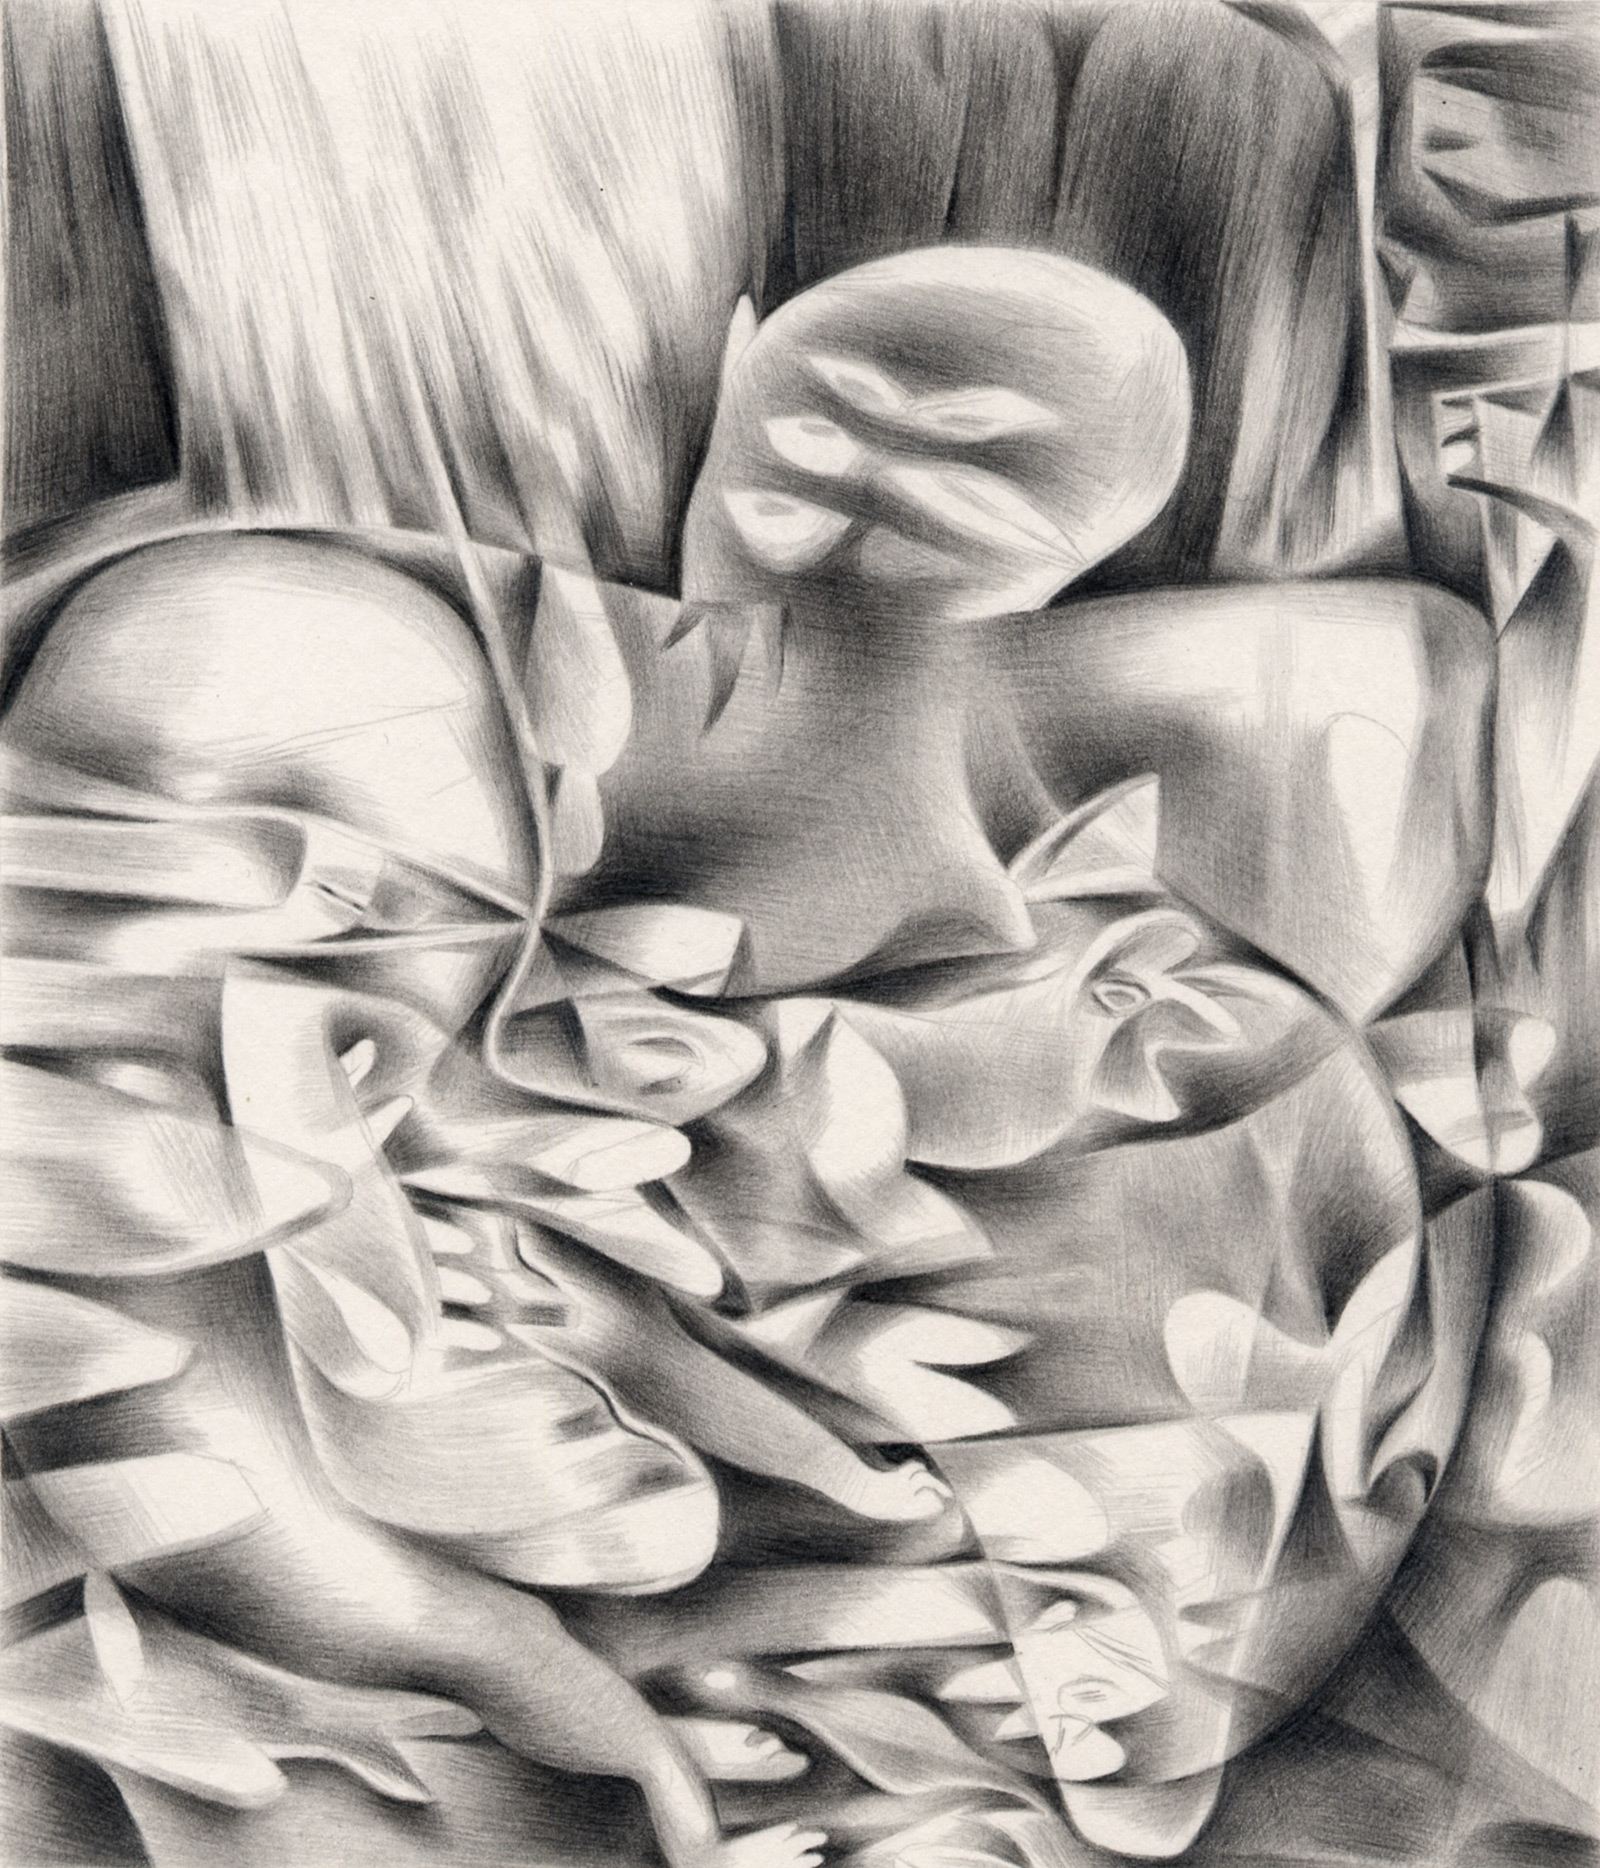   Baby Fat , 2003. Graphite on paper. 6" x 7". 